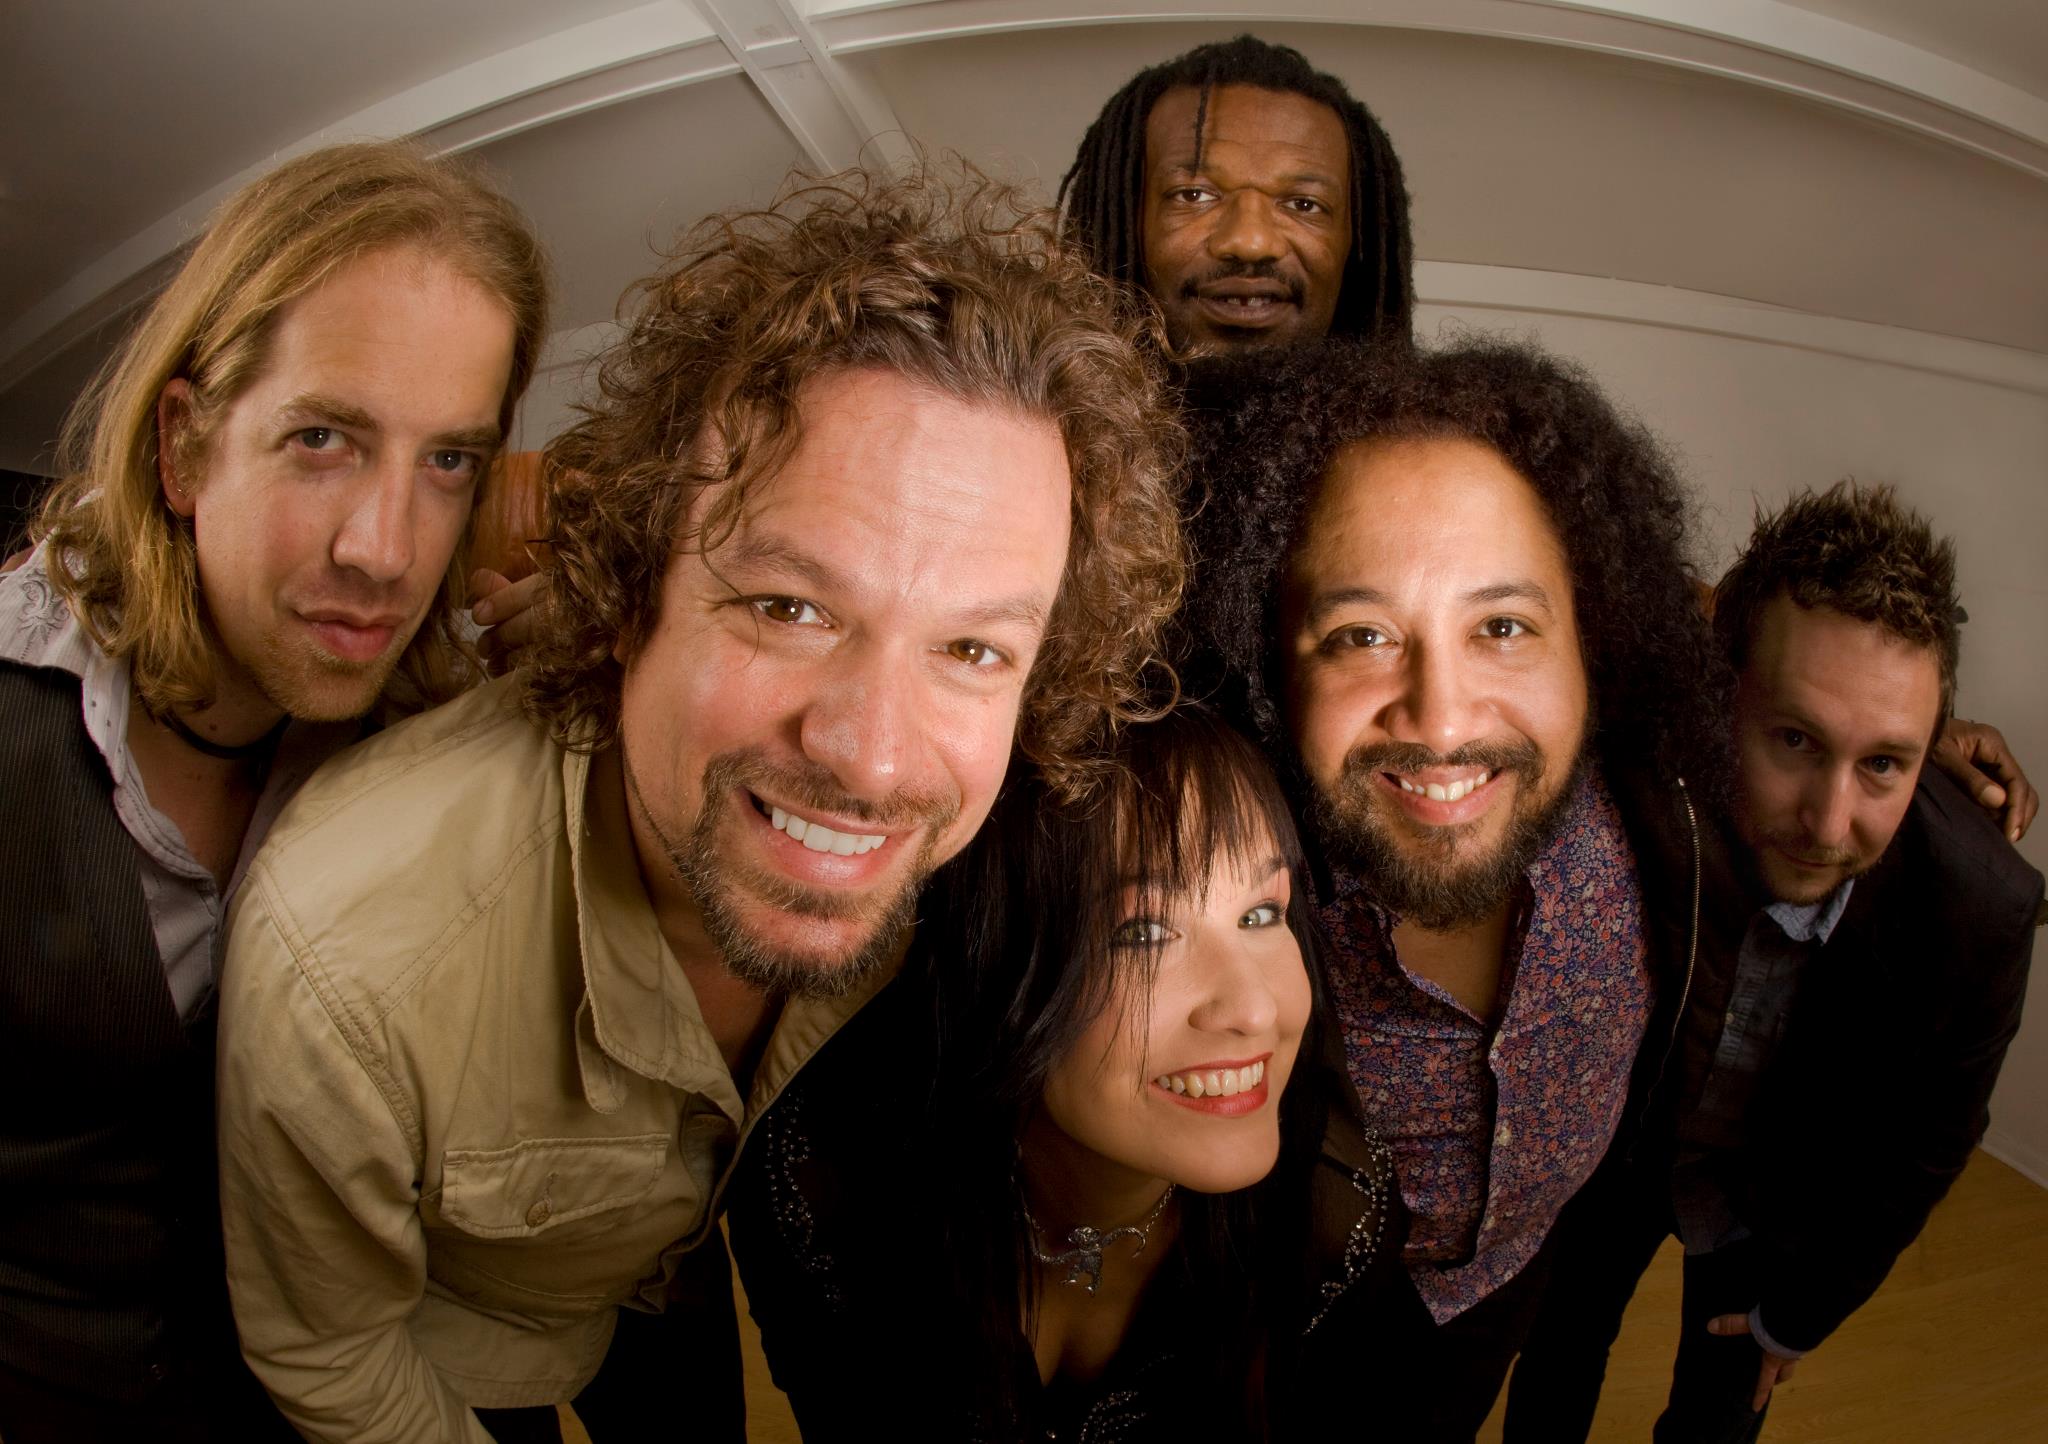 Digging Deeper: Rusted Root's Devotion to the Light with the Music of The Movement